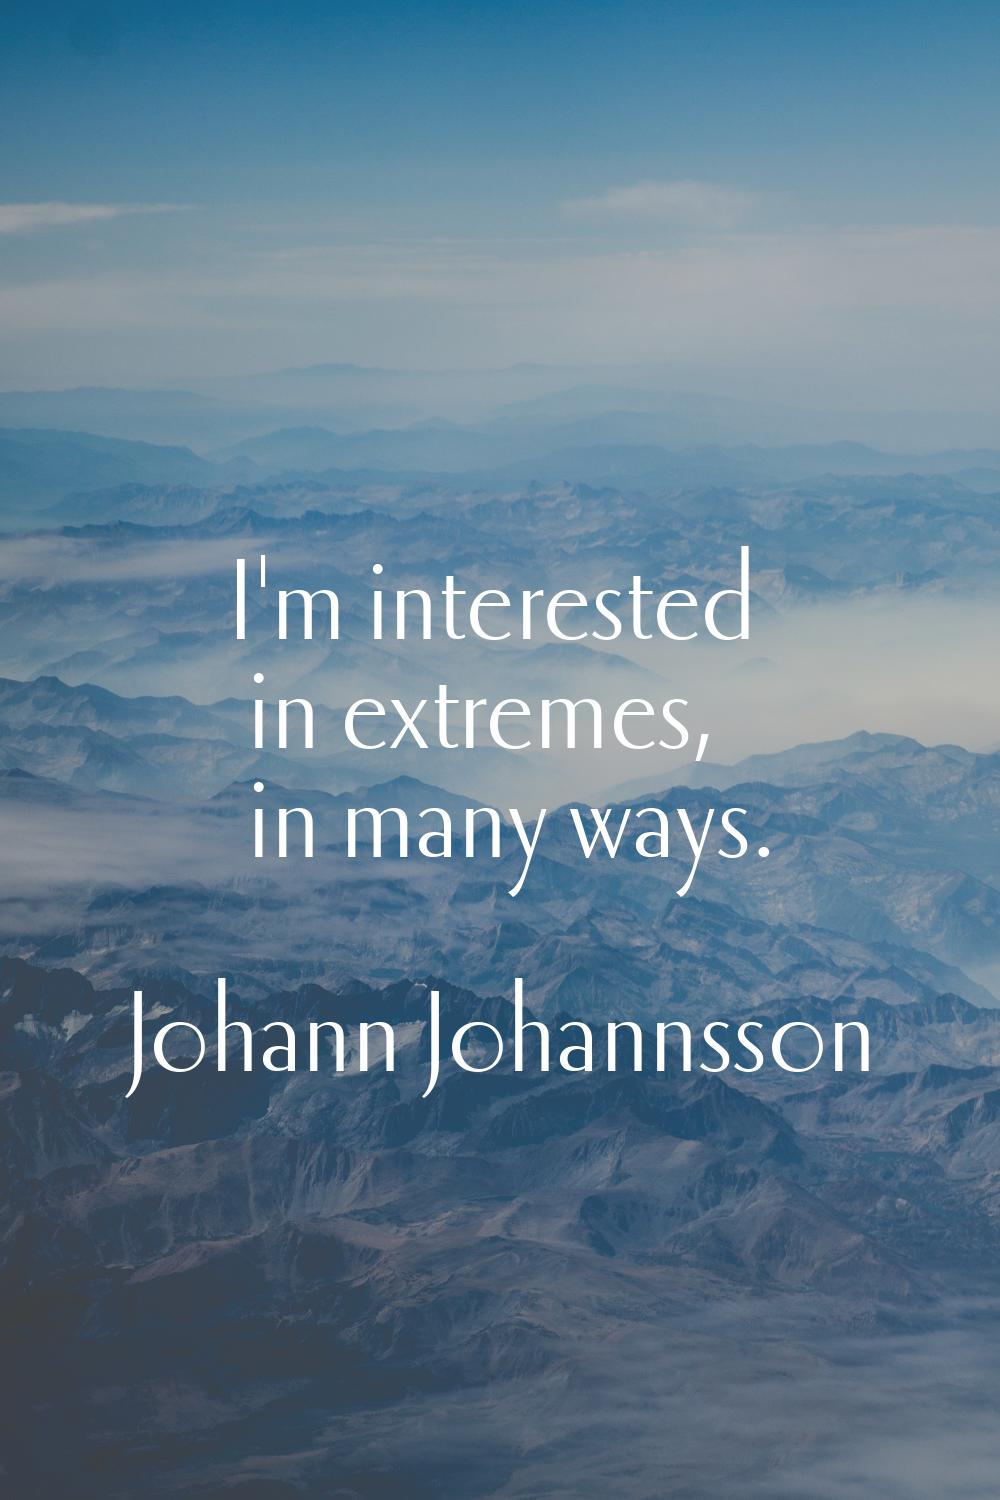 I'm interested in extremes, in many ways.